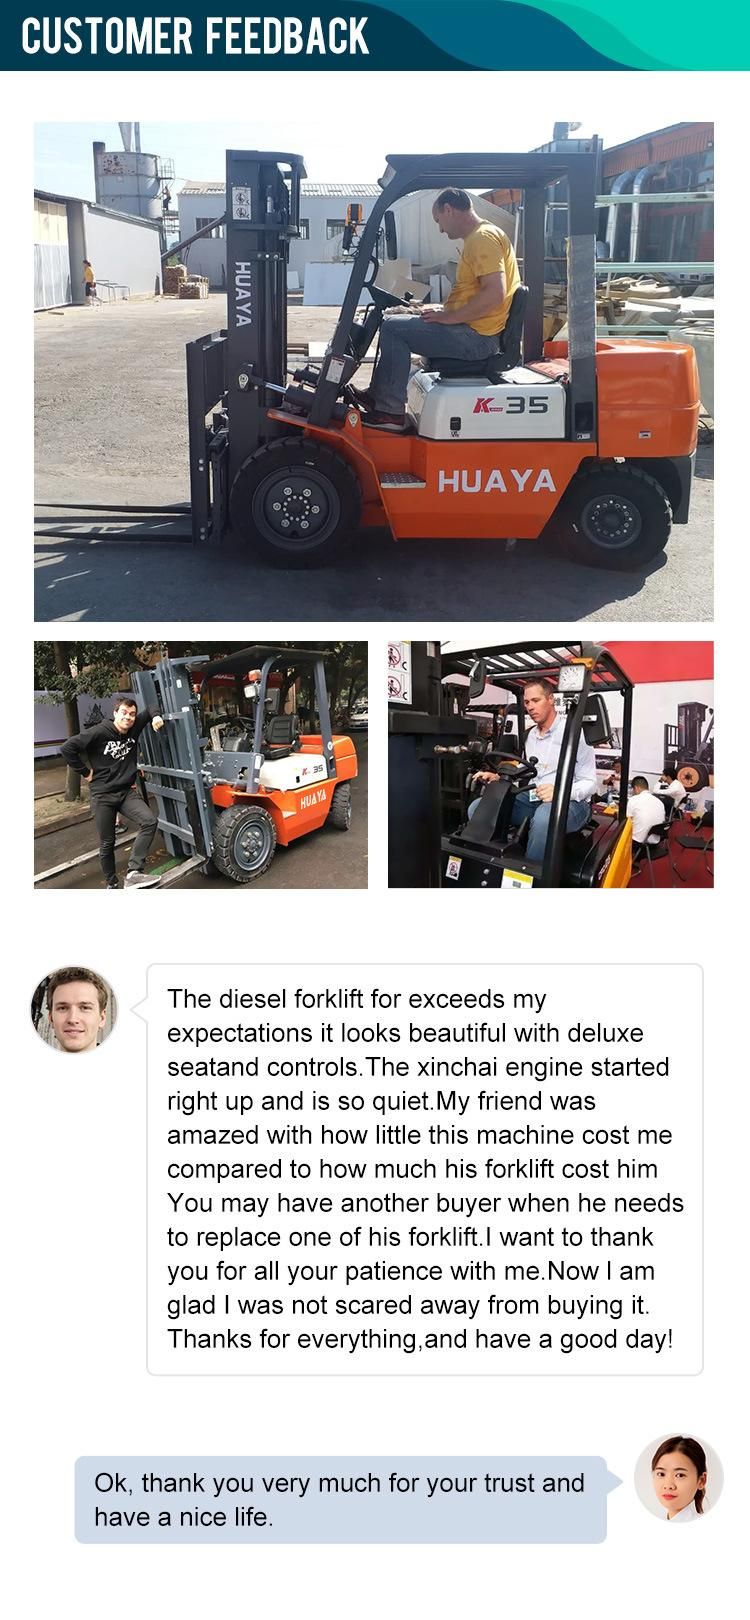 Huaya Multi Functional Mini China Forklift for Manufacturer Construction 2000-10000kg Four Wheel Balance Heavy Diesel/Gas /LPG/Electric Forklift with CE ISO9001